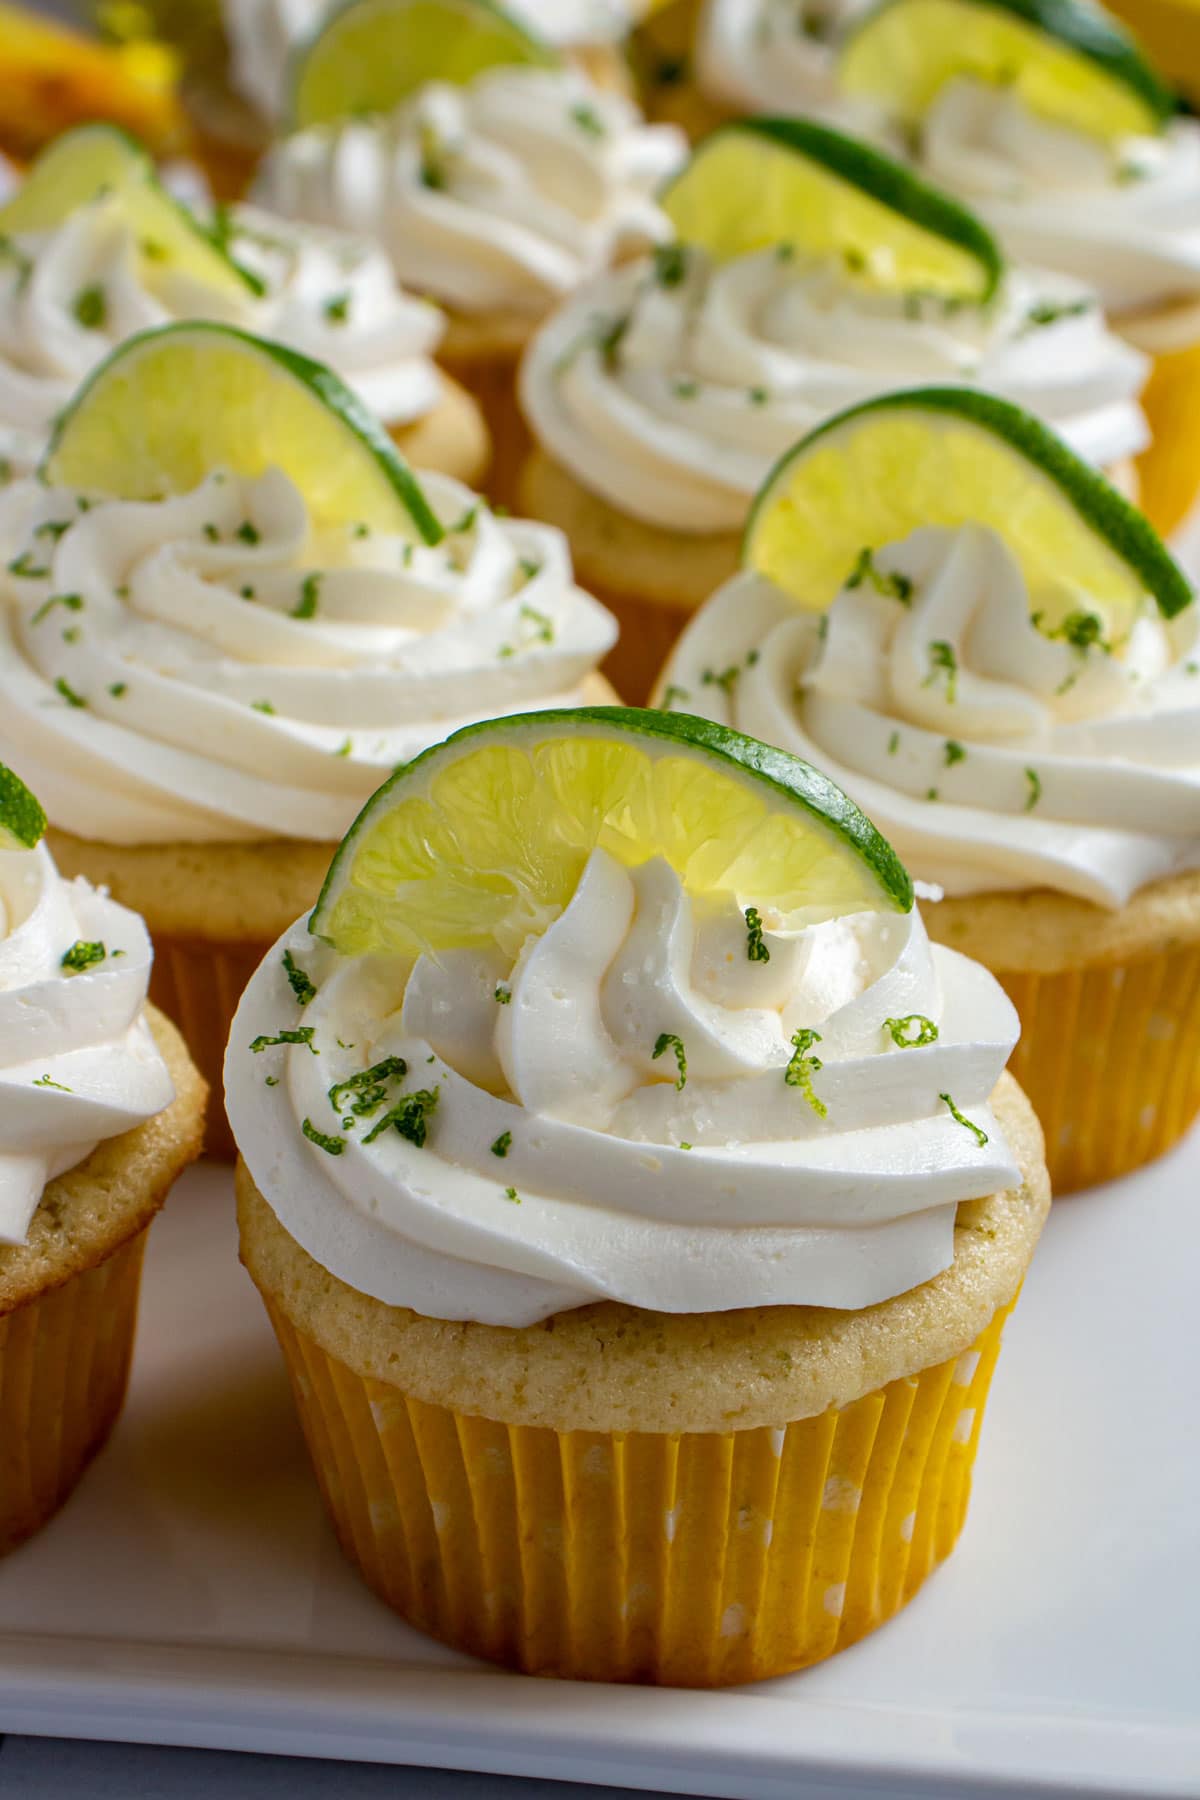 White cupcakes with yellow wrappers, white frosting, and lime slice and zest garnish.